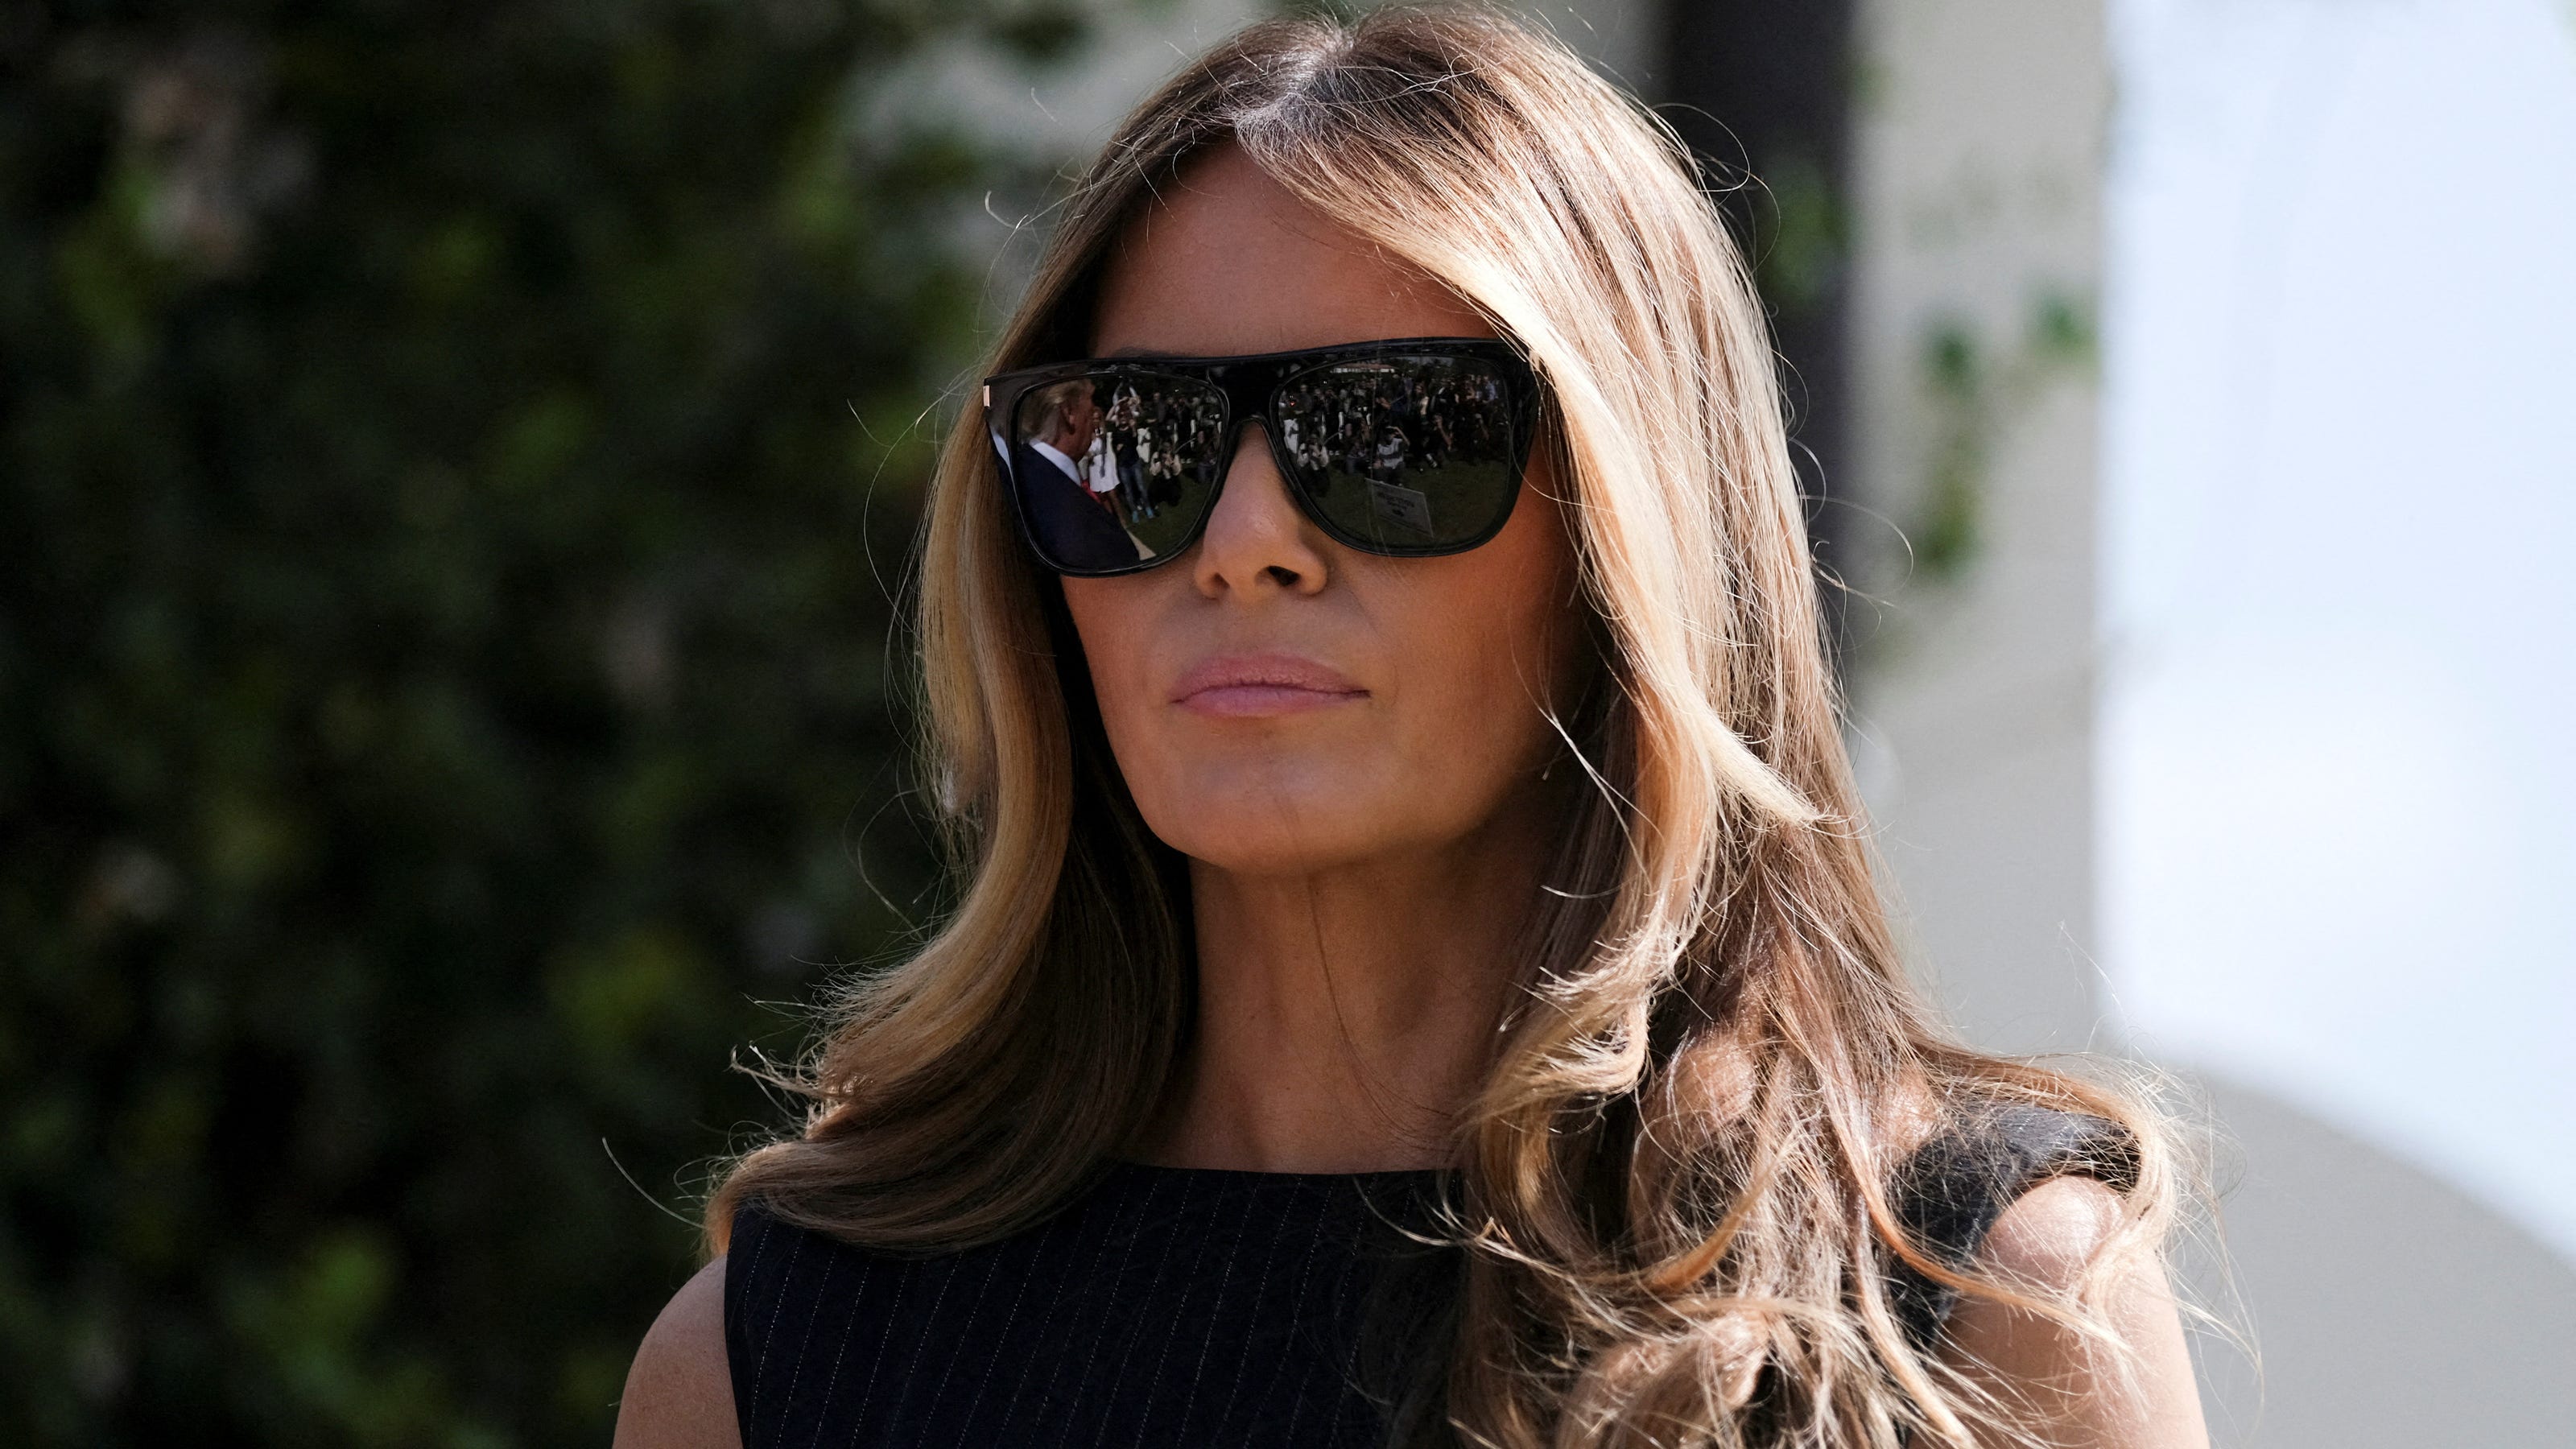 Melania Trump is not scheduled to speak at the RNC. Here's why that's unusual.